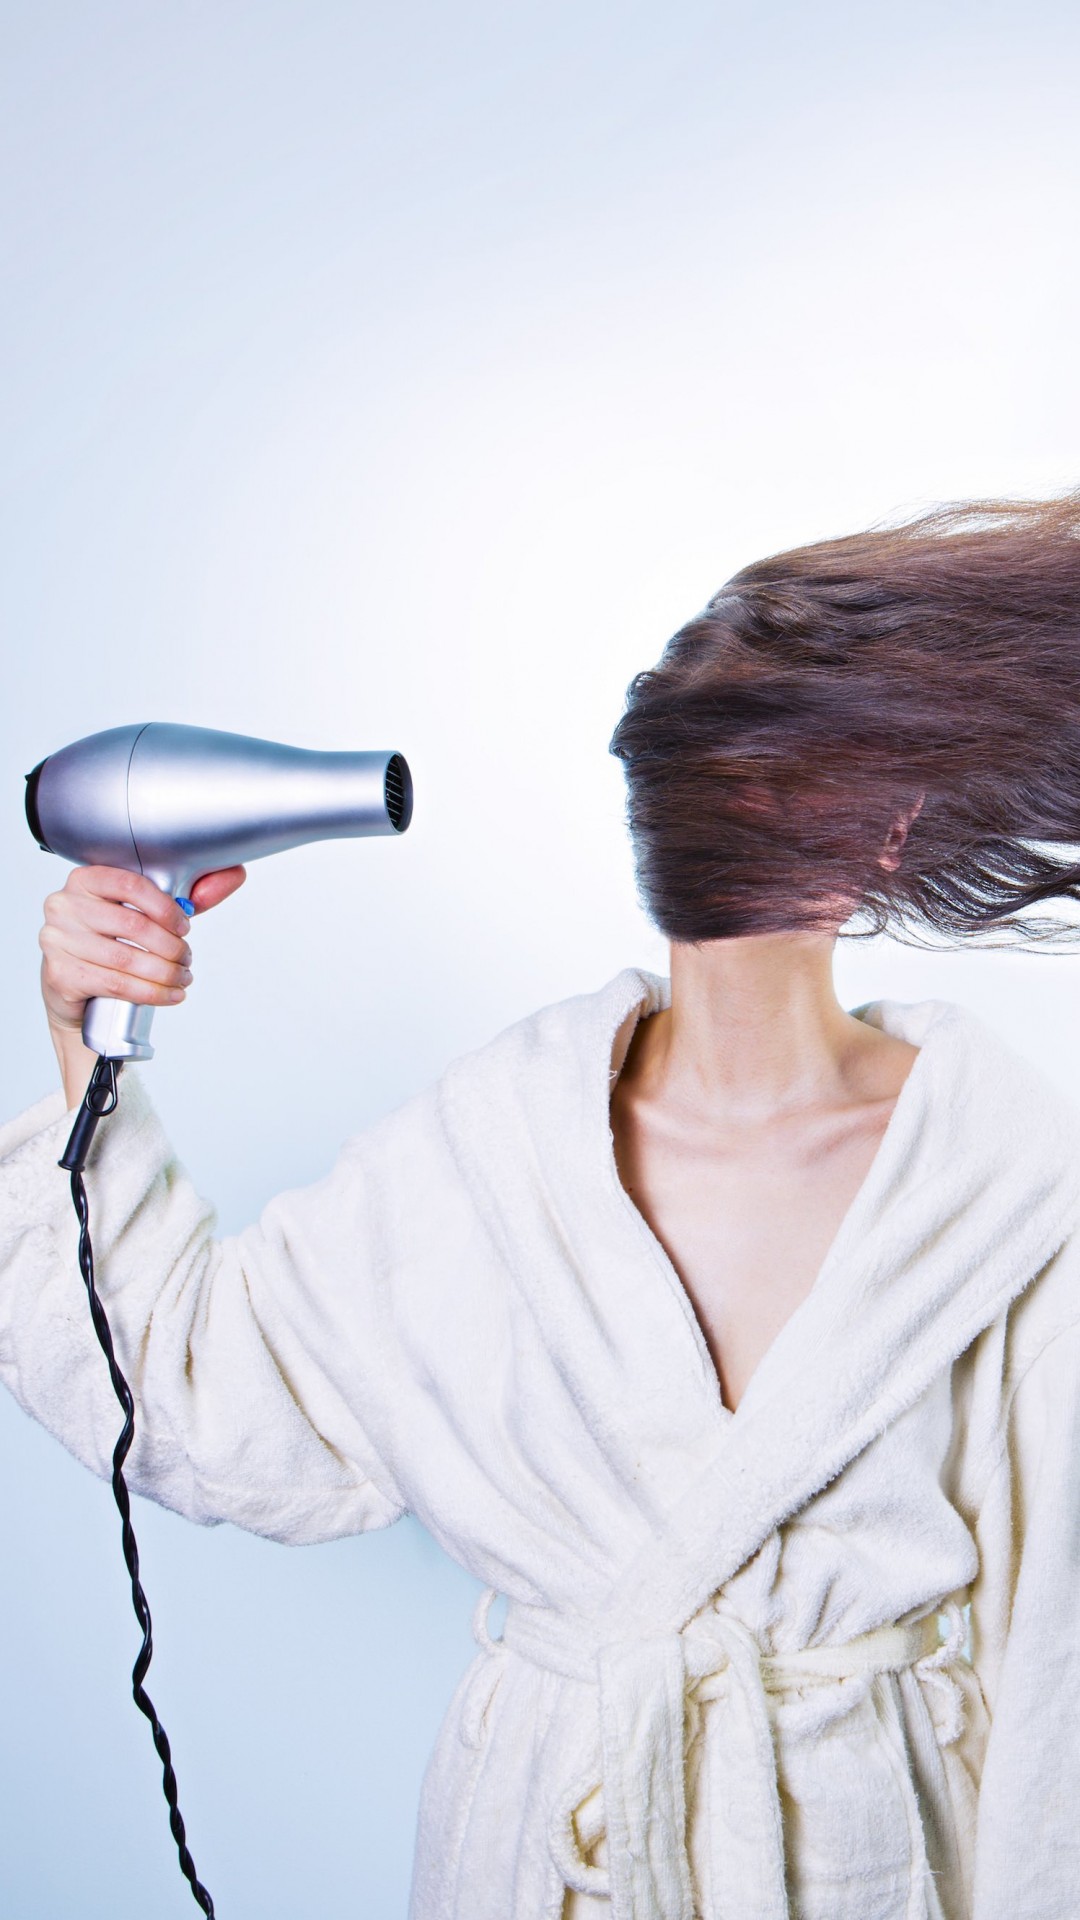 Powerful Hair Dryer Wallpaper for SAMSUNG Galaxy S5